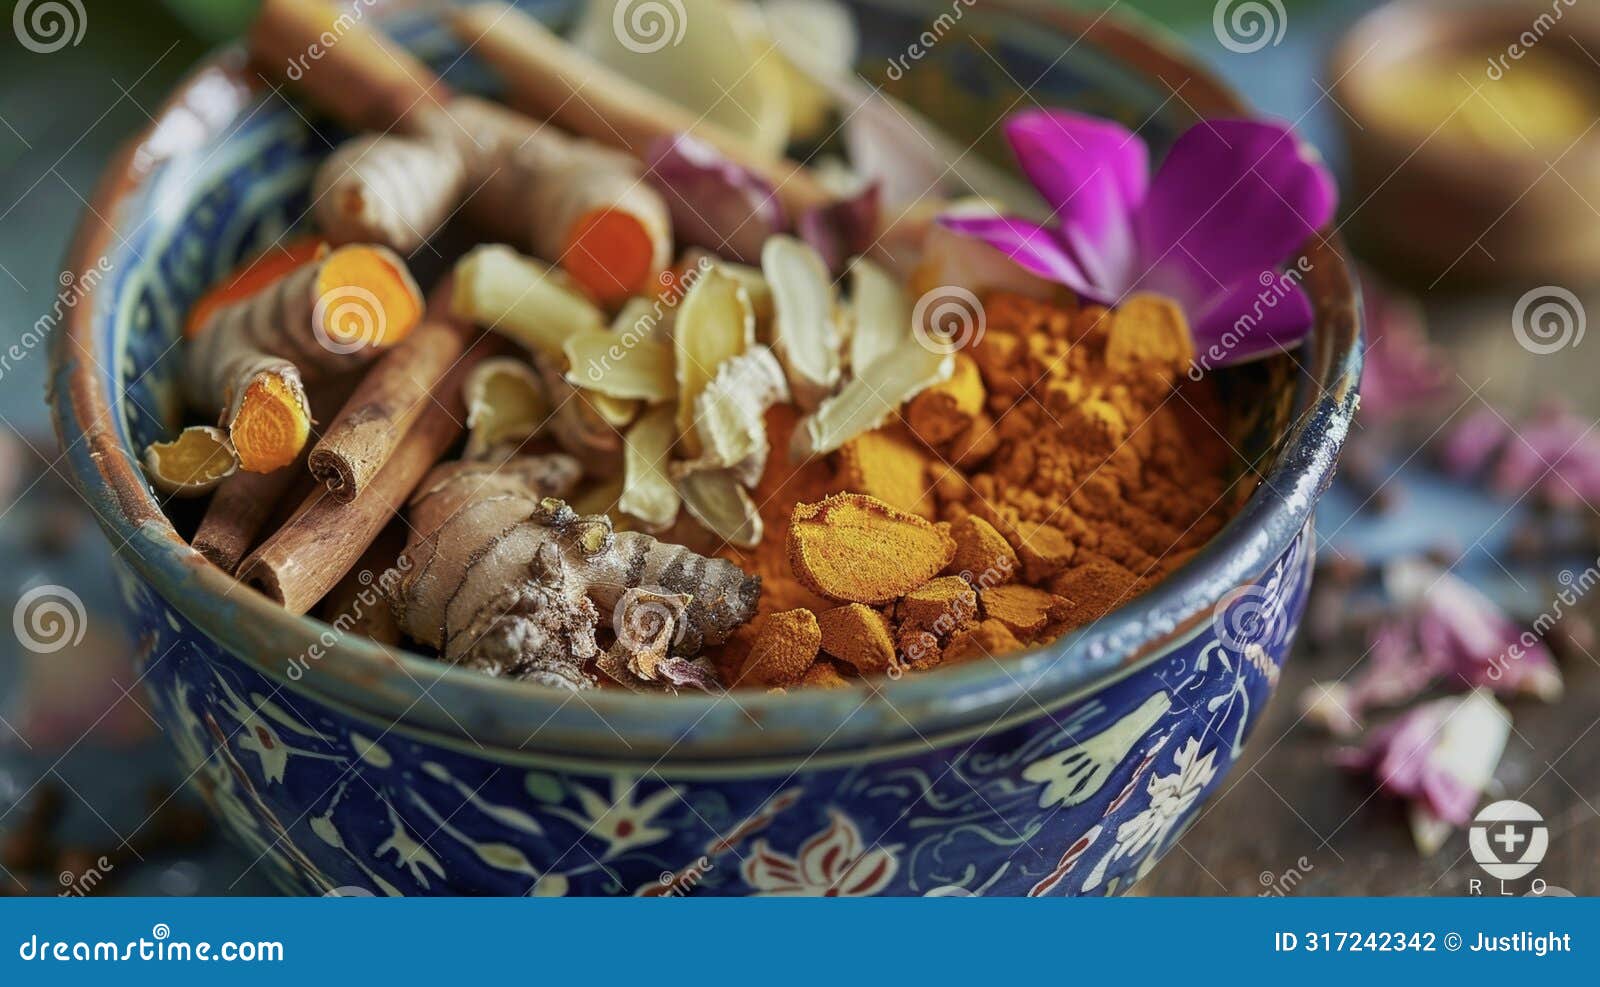 a bowl of colorful es including turmeric ginger and cinnamon commonly used in traditional medicine for their